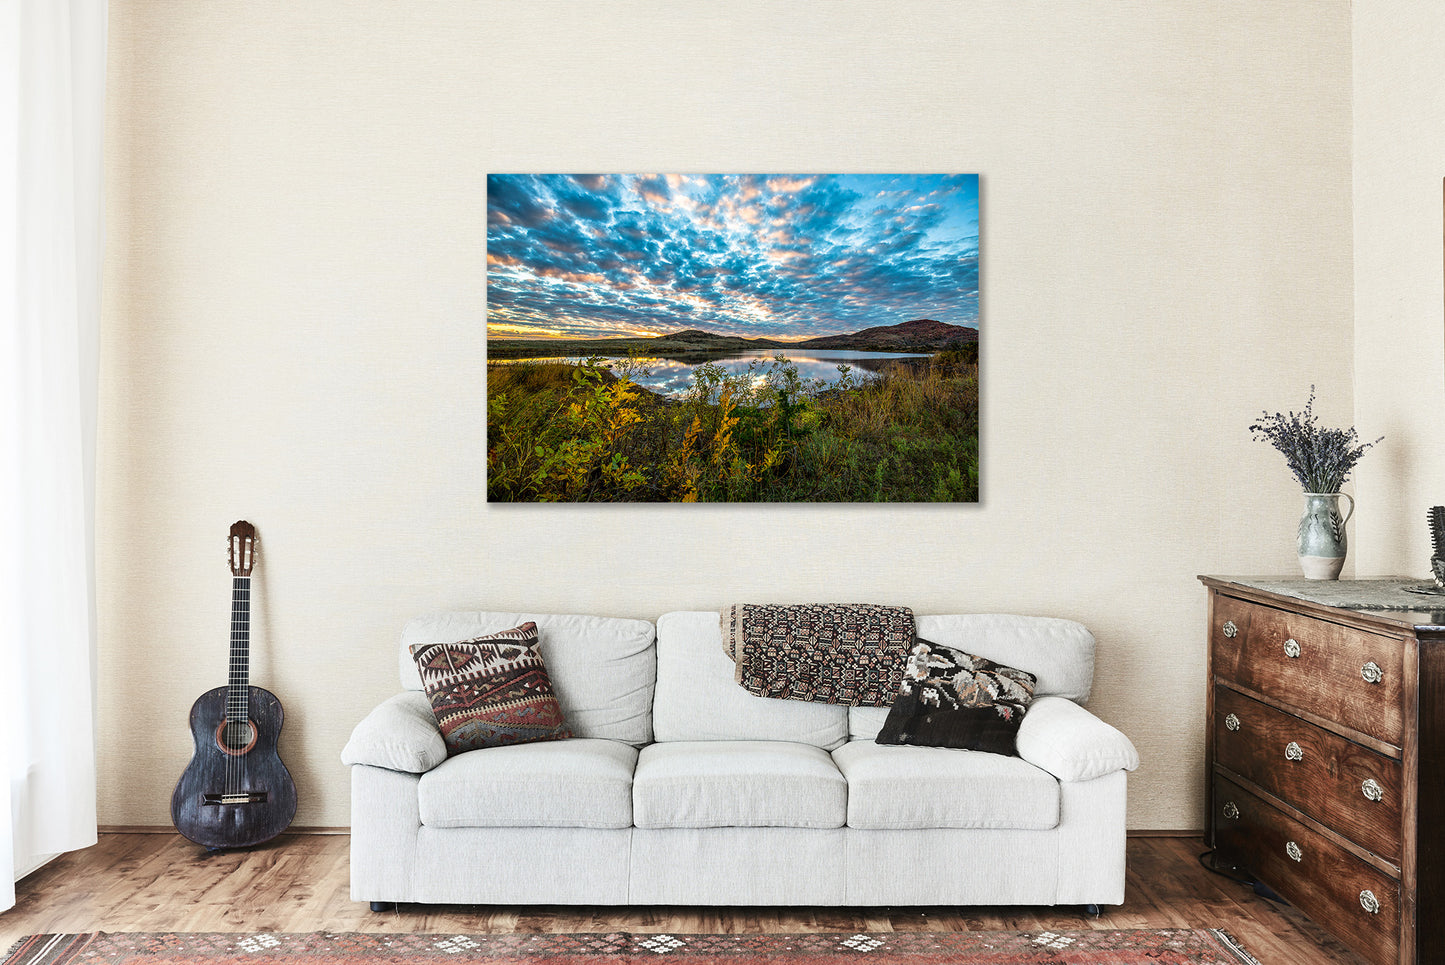 Wichita Mountains Canvas | Landscape Gallery Wrap | Oklahoma Photography | Scenic Sky Wall Art | Nature Decor | Ready to Hang